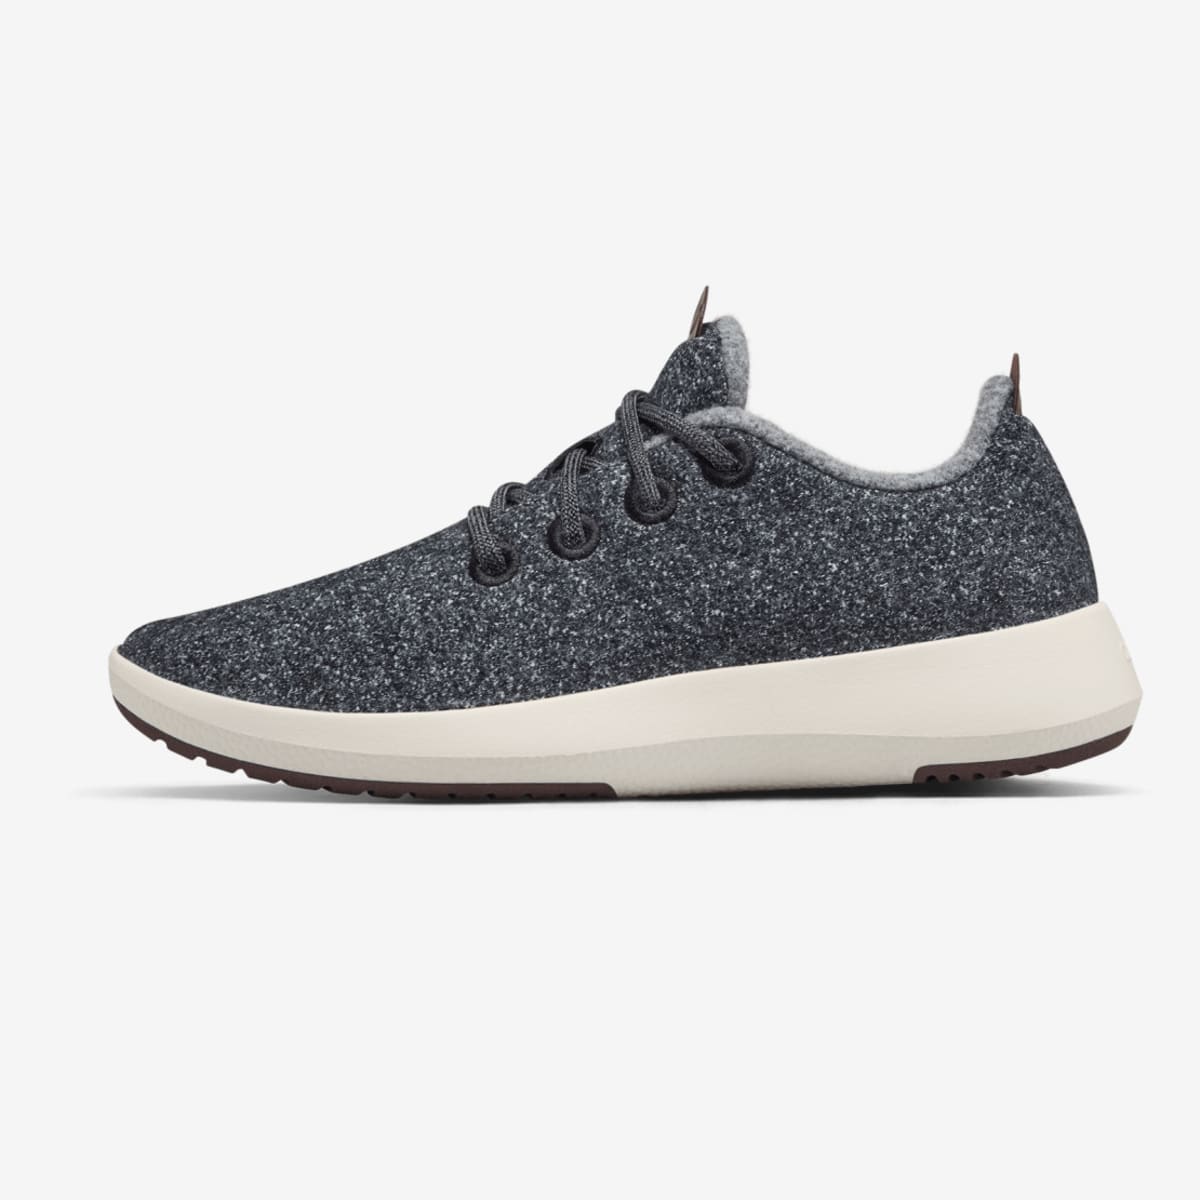 Allbirds wool shoes - ideal walking shoes for women who travel